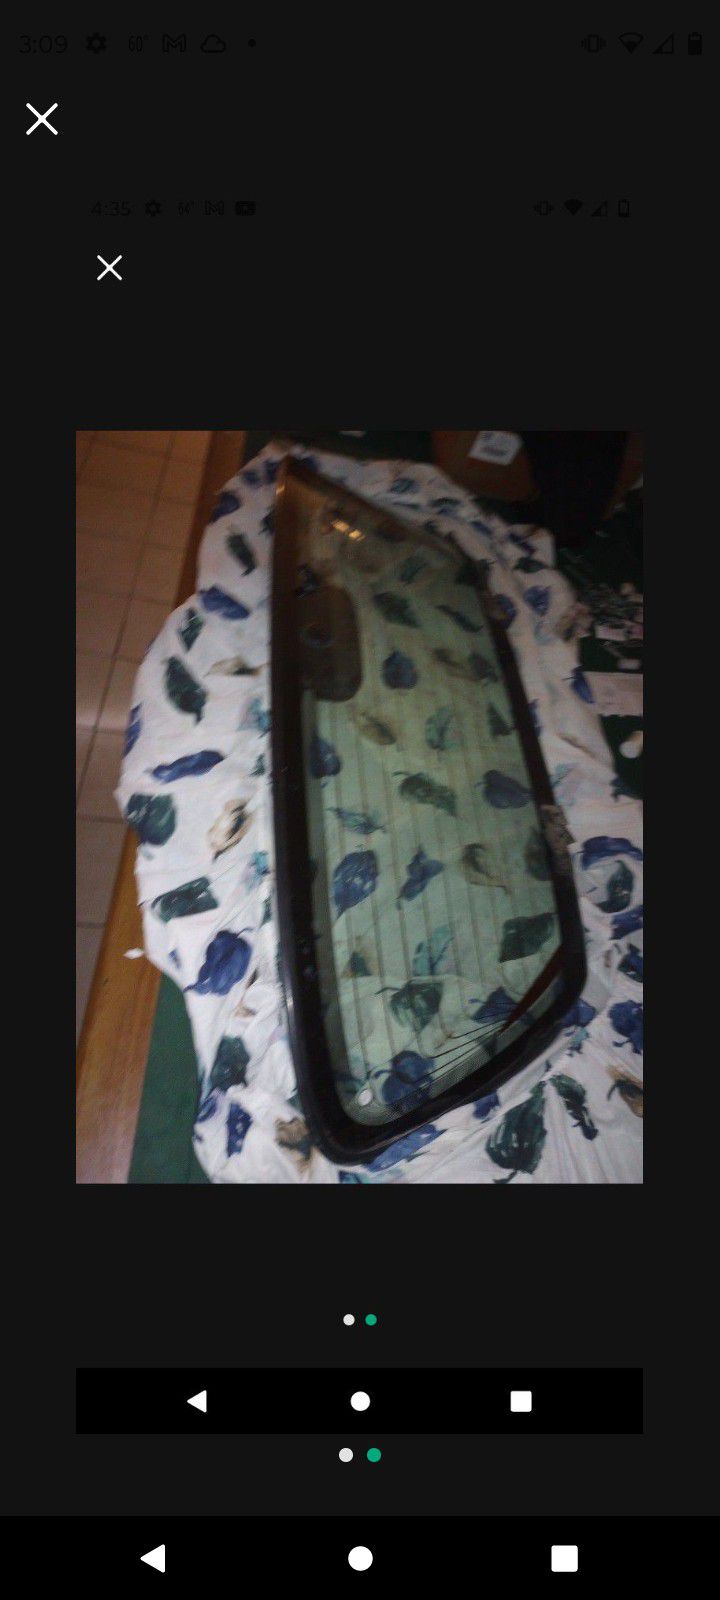 1993 Civic Hatchback Rear Window In Good Condition